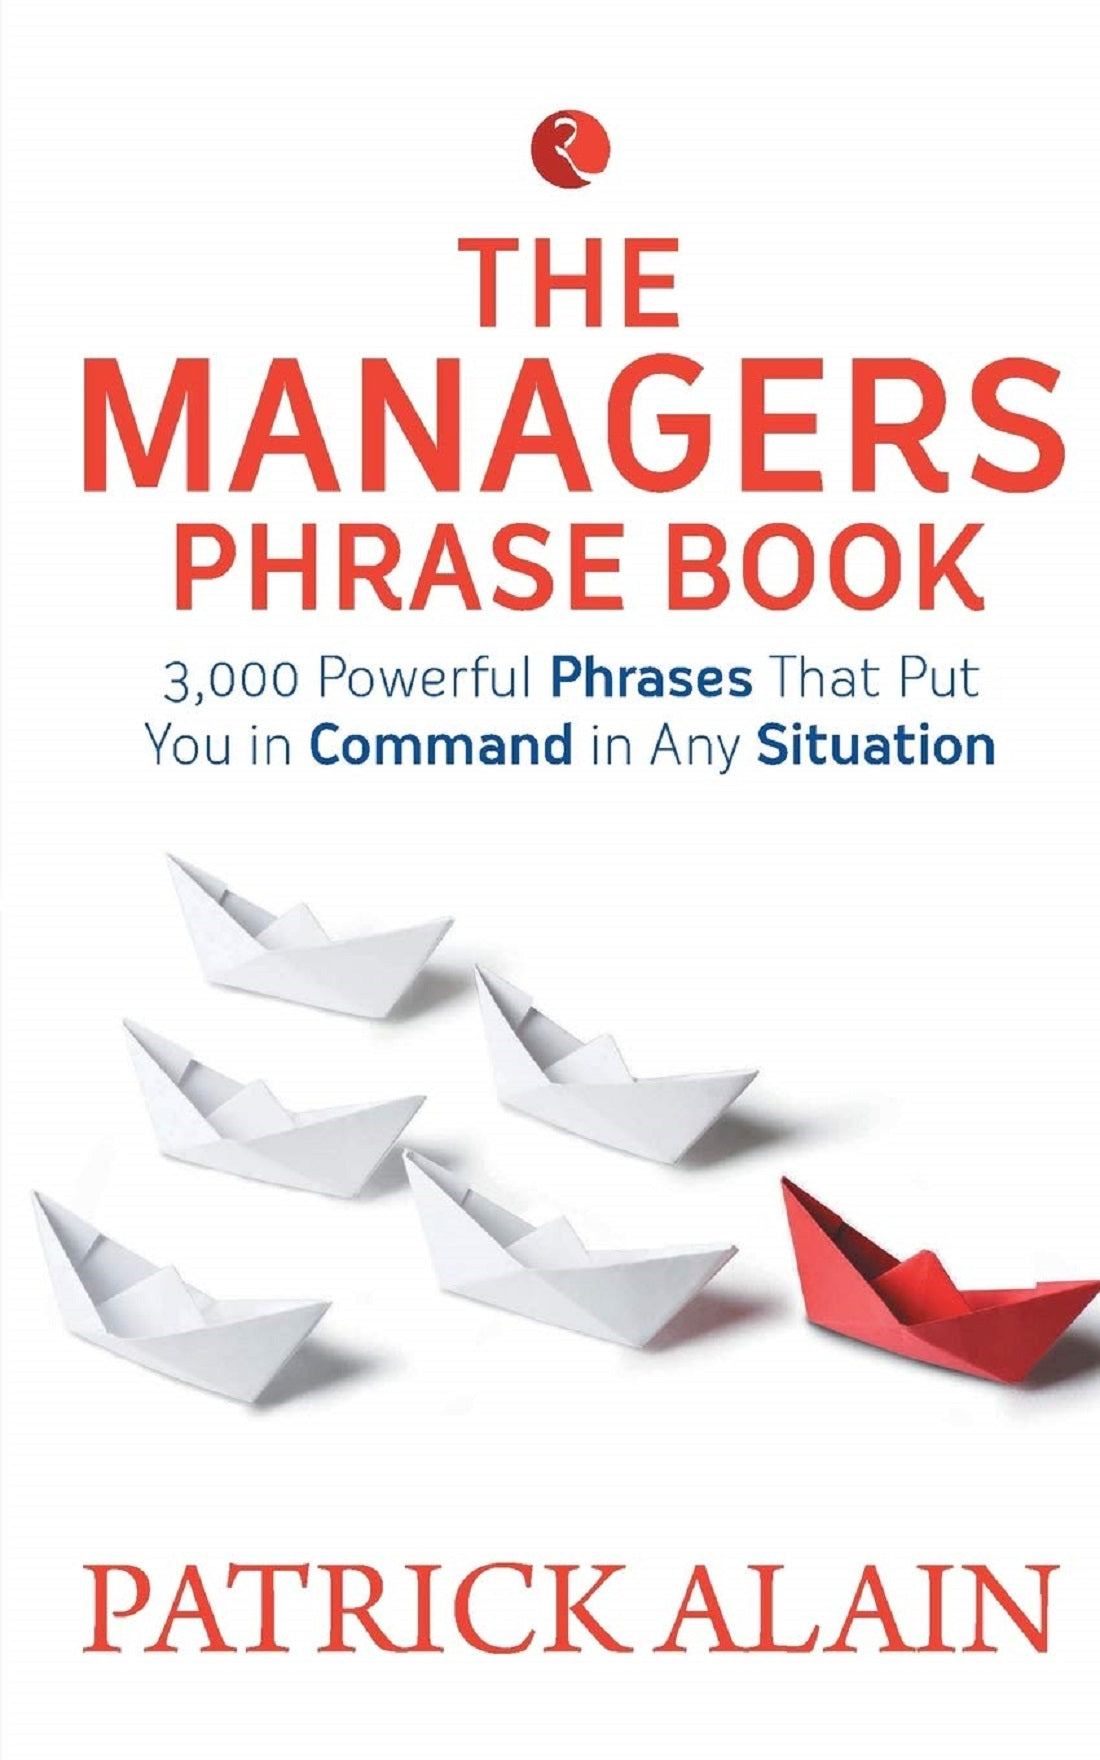 VOCABULARY OF A MANAGER